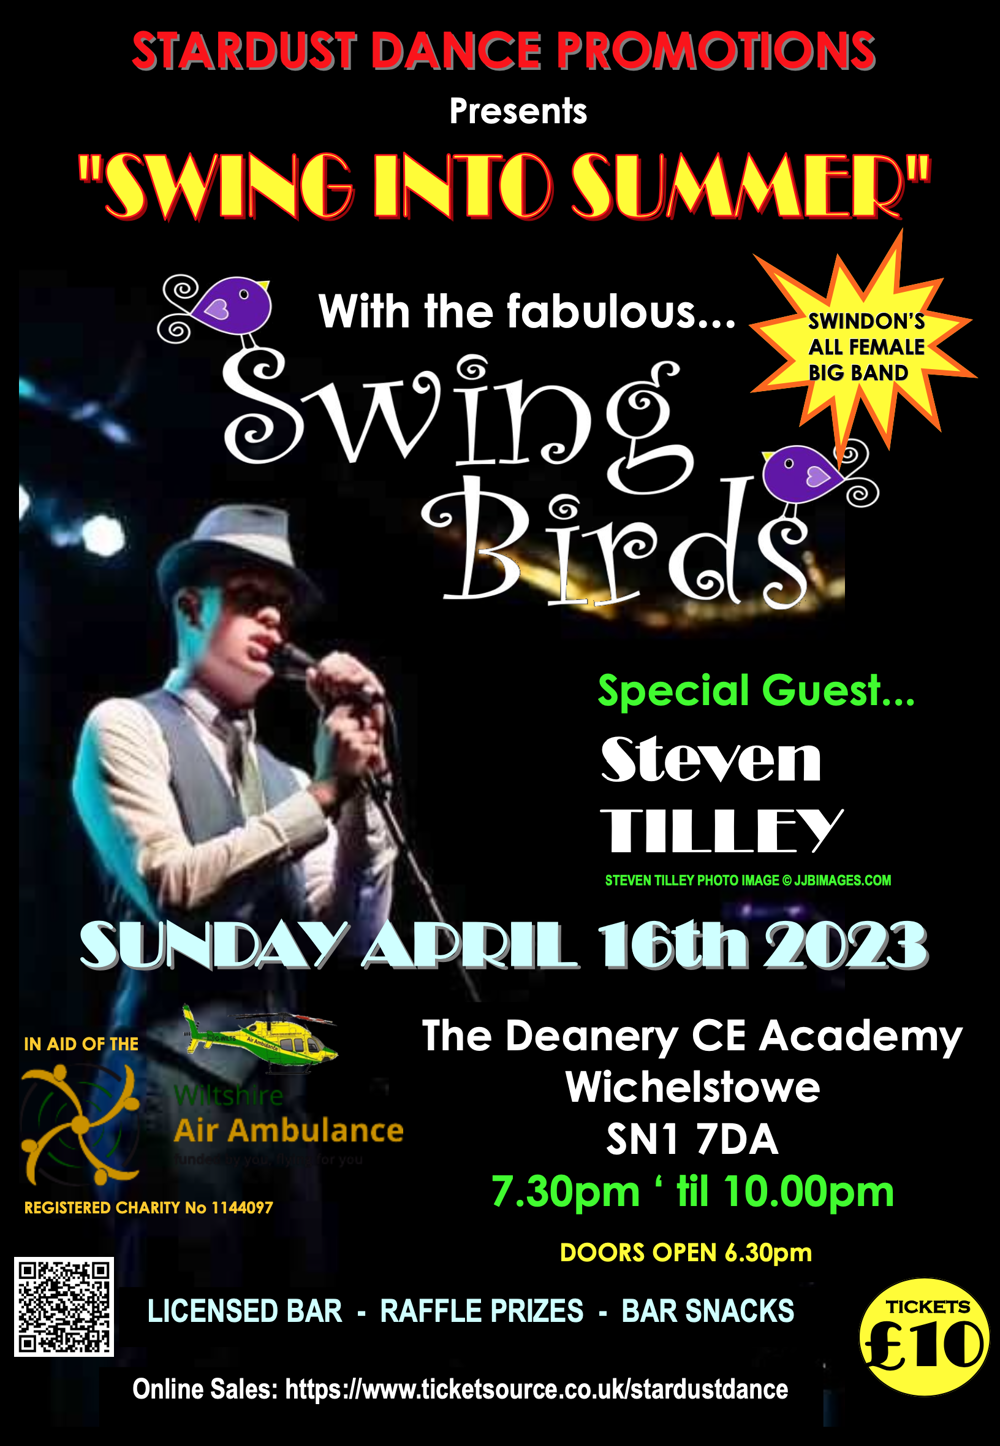 A poster advertising a Swing Into Summer event showing a singer with a microphone on a black background